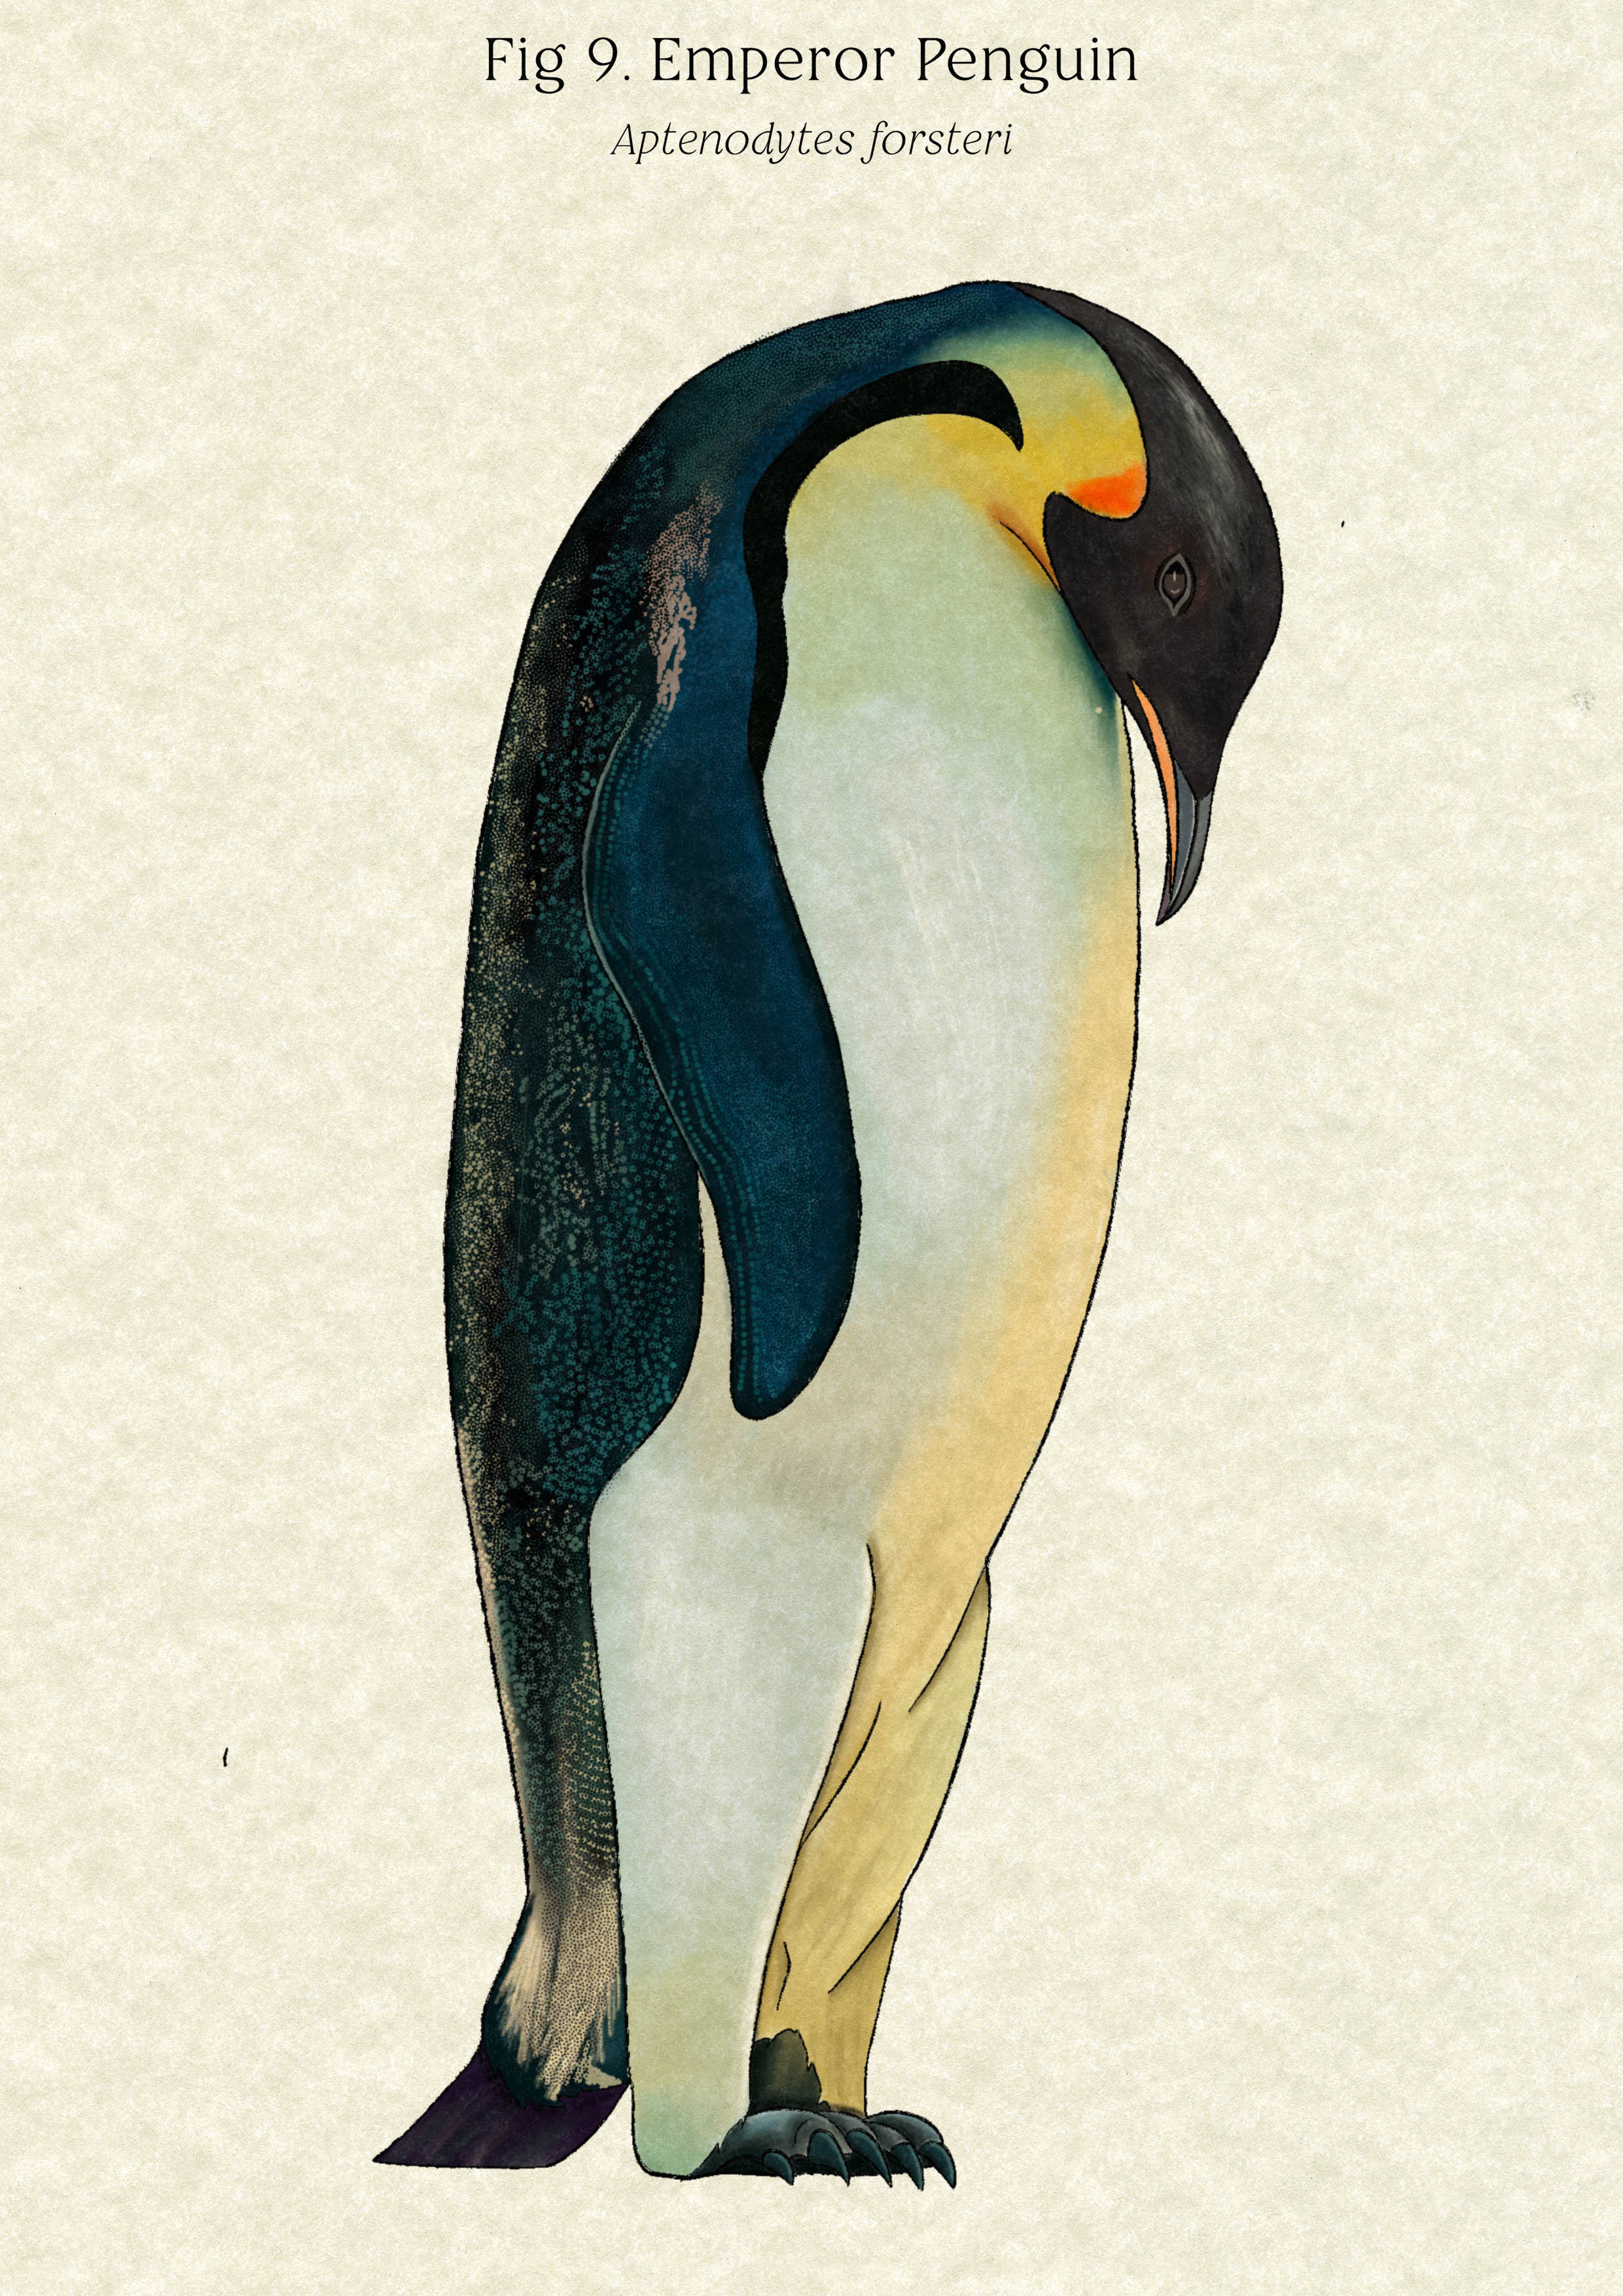 BA Illustration work by Chloe Smith showing a drawing of an Emperor Penguin